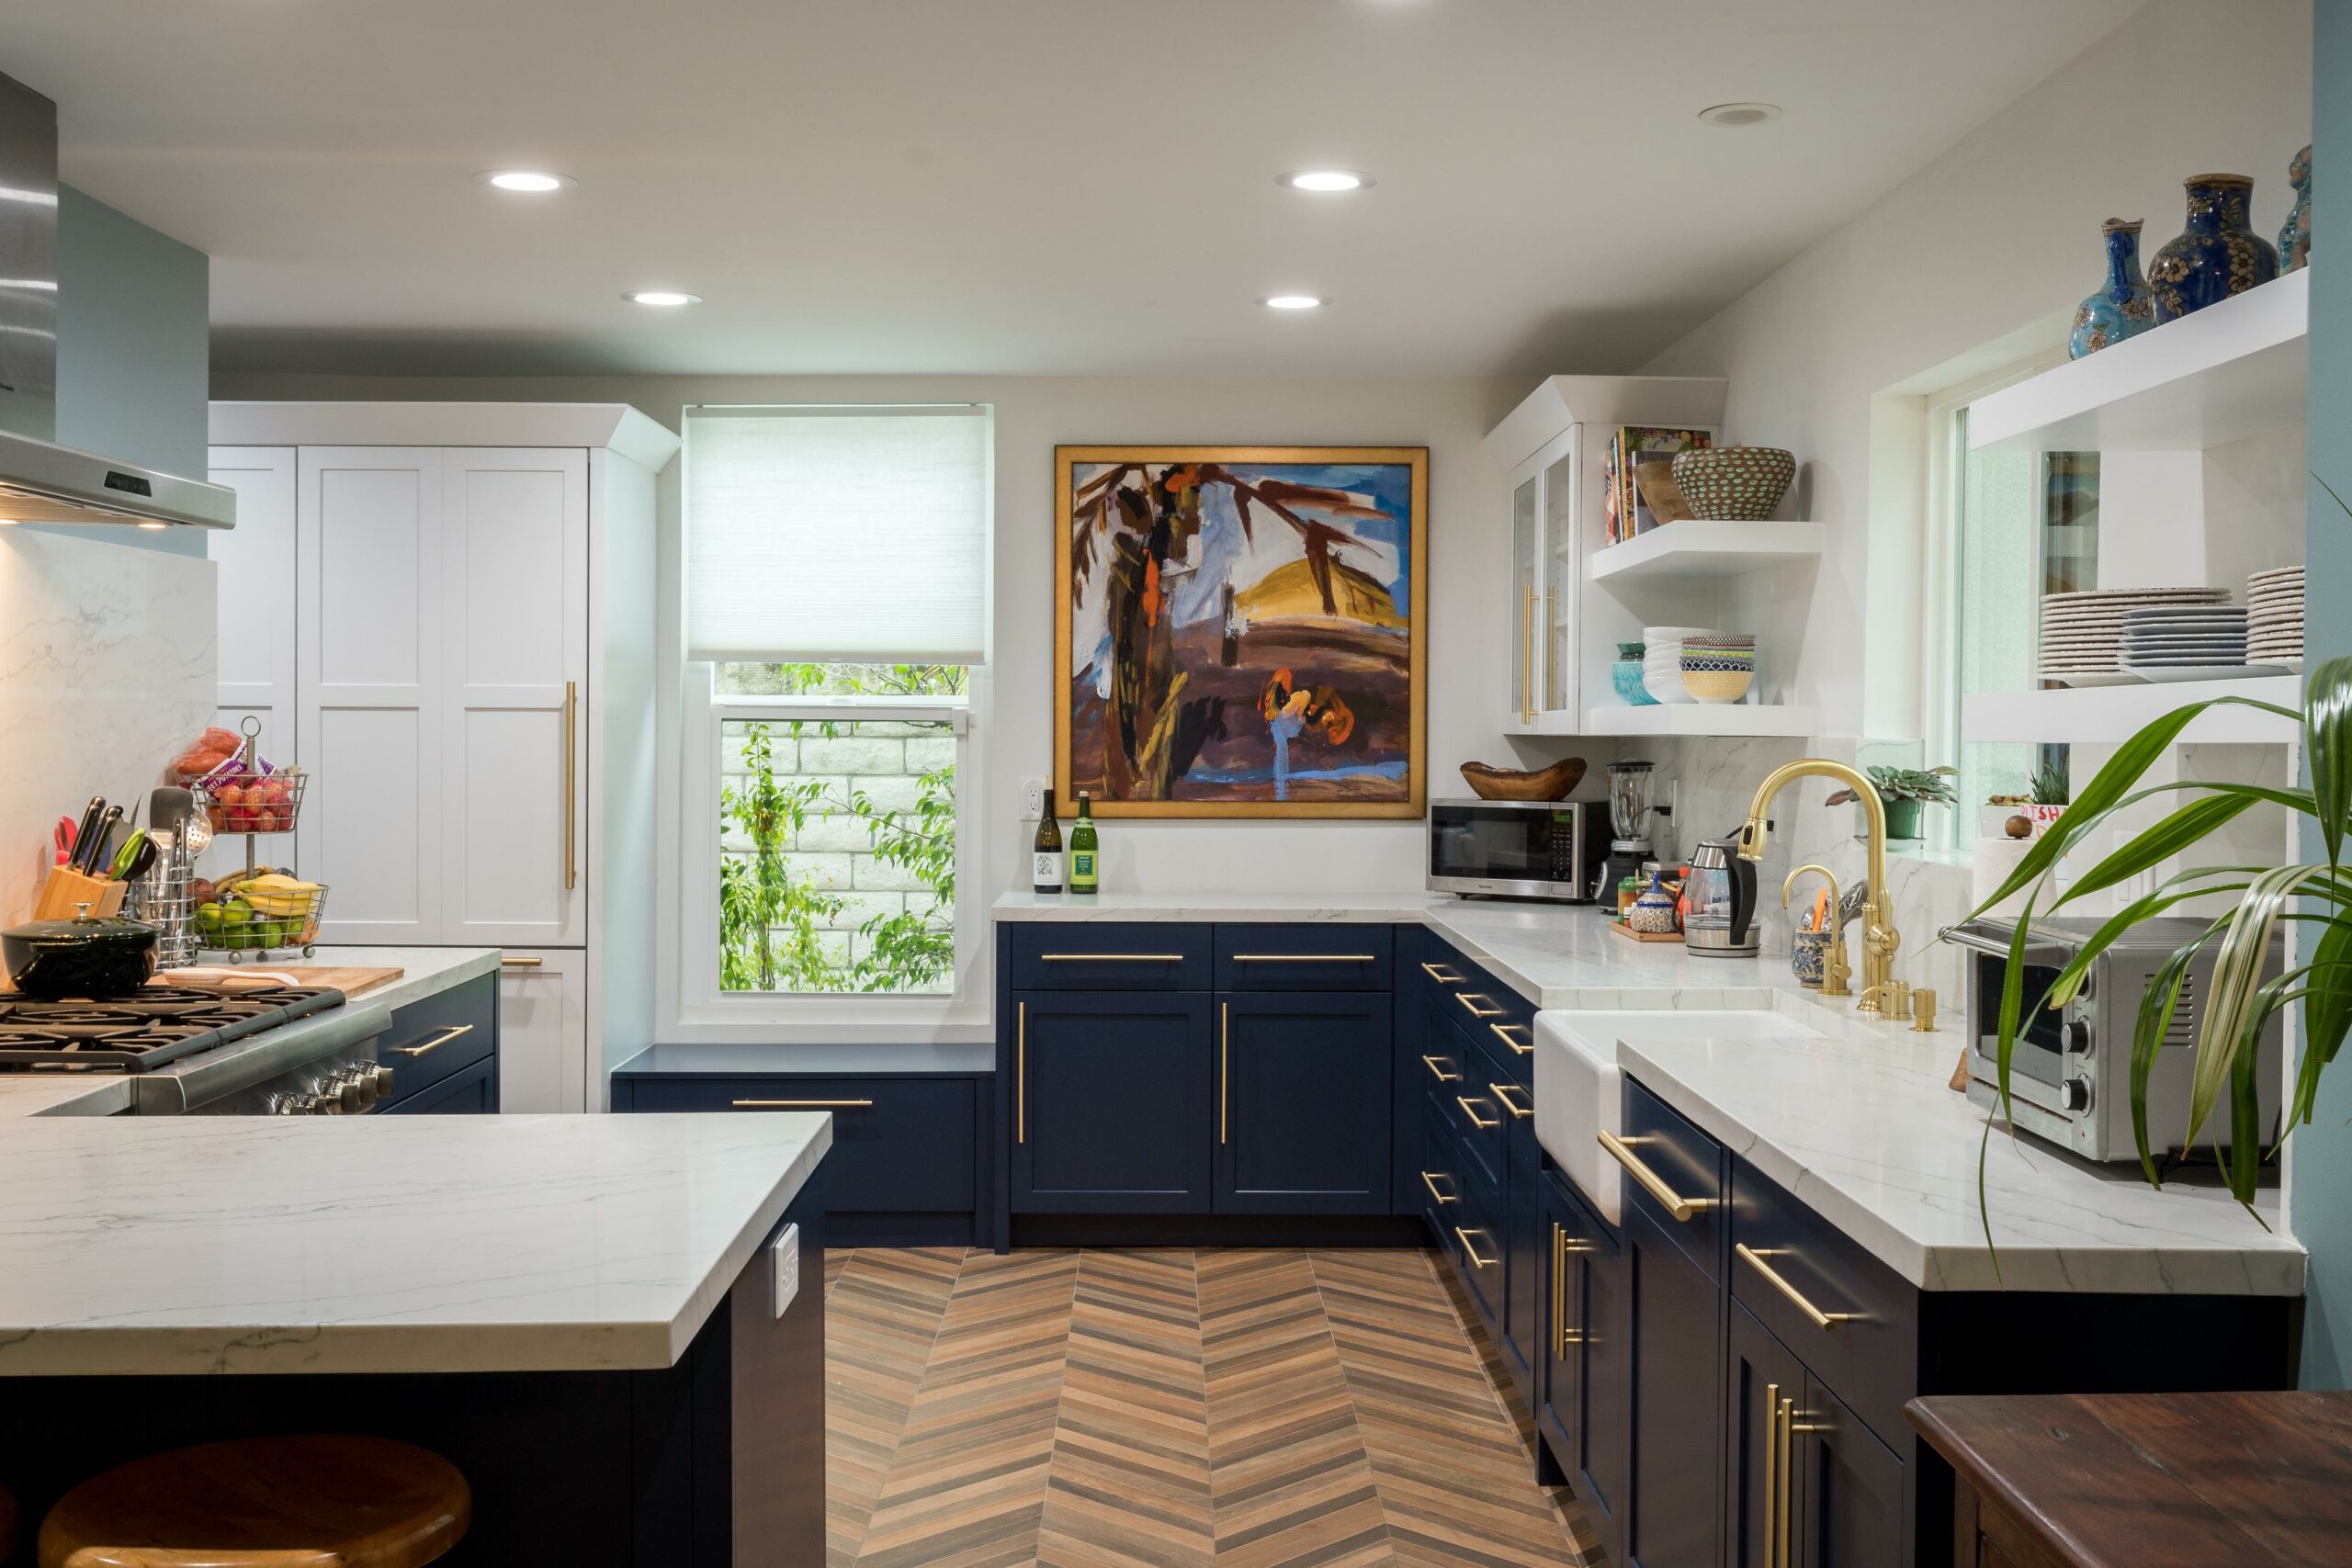 Modern kitchen interior with white and navy cabinets.